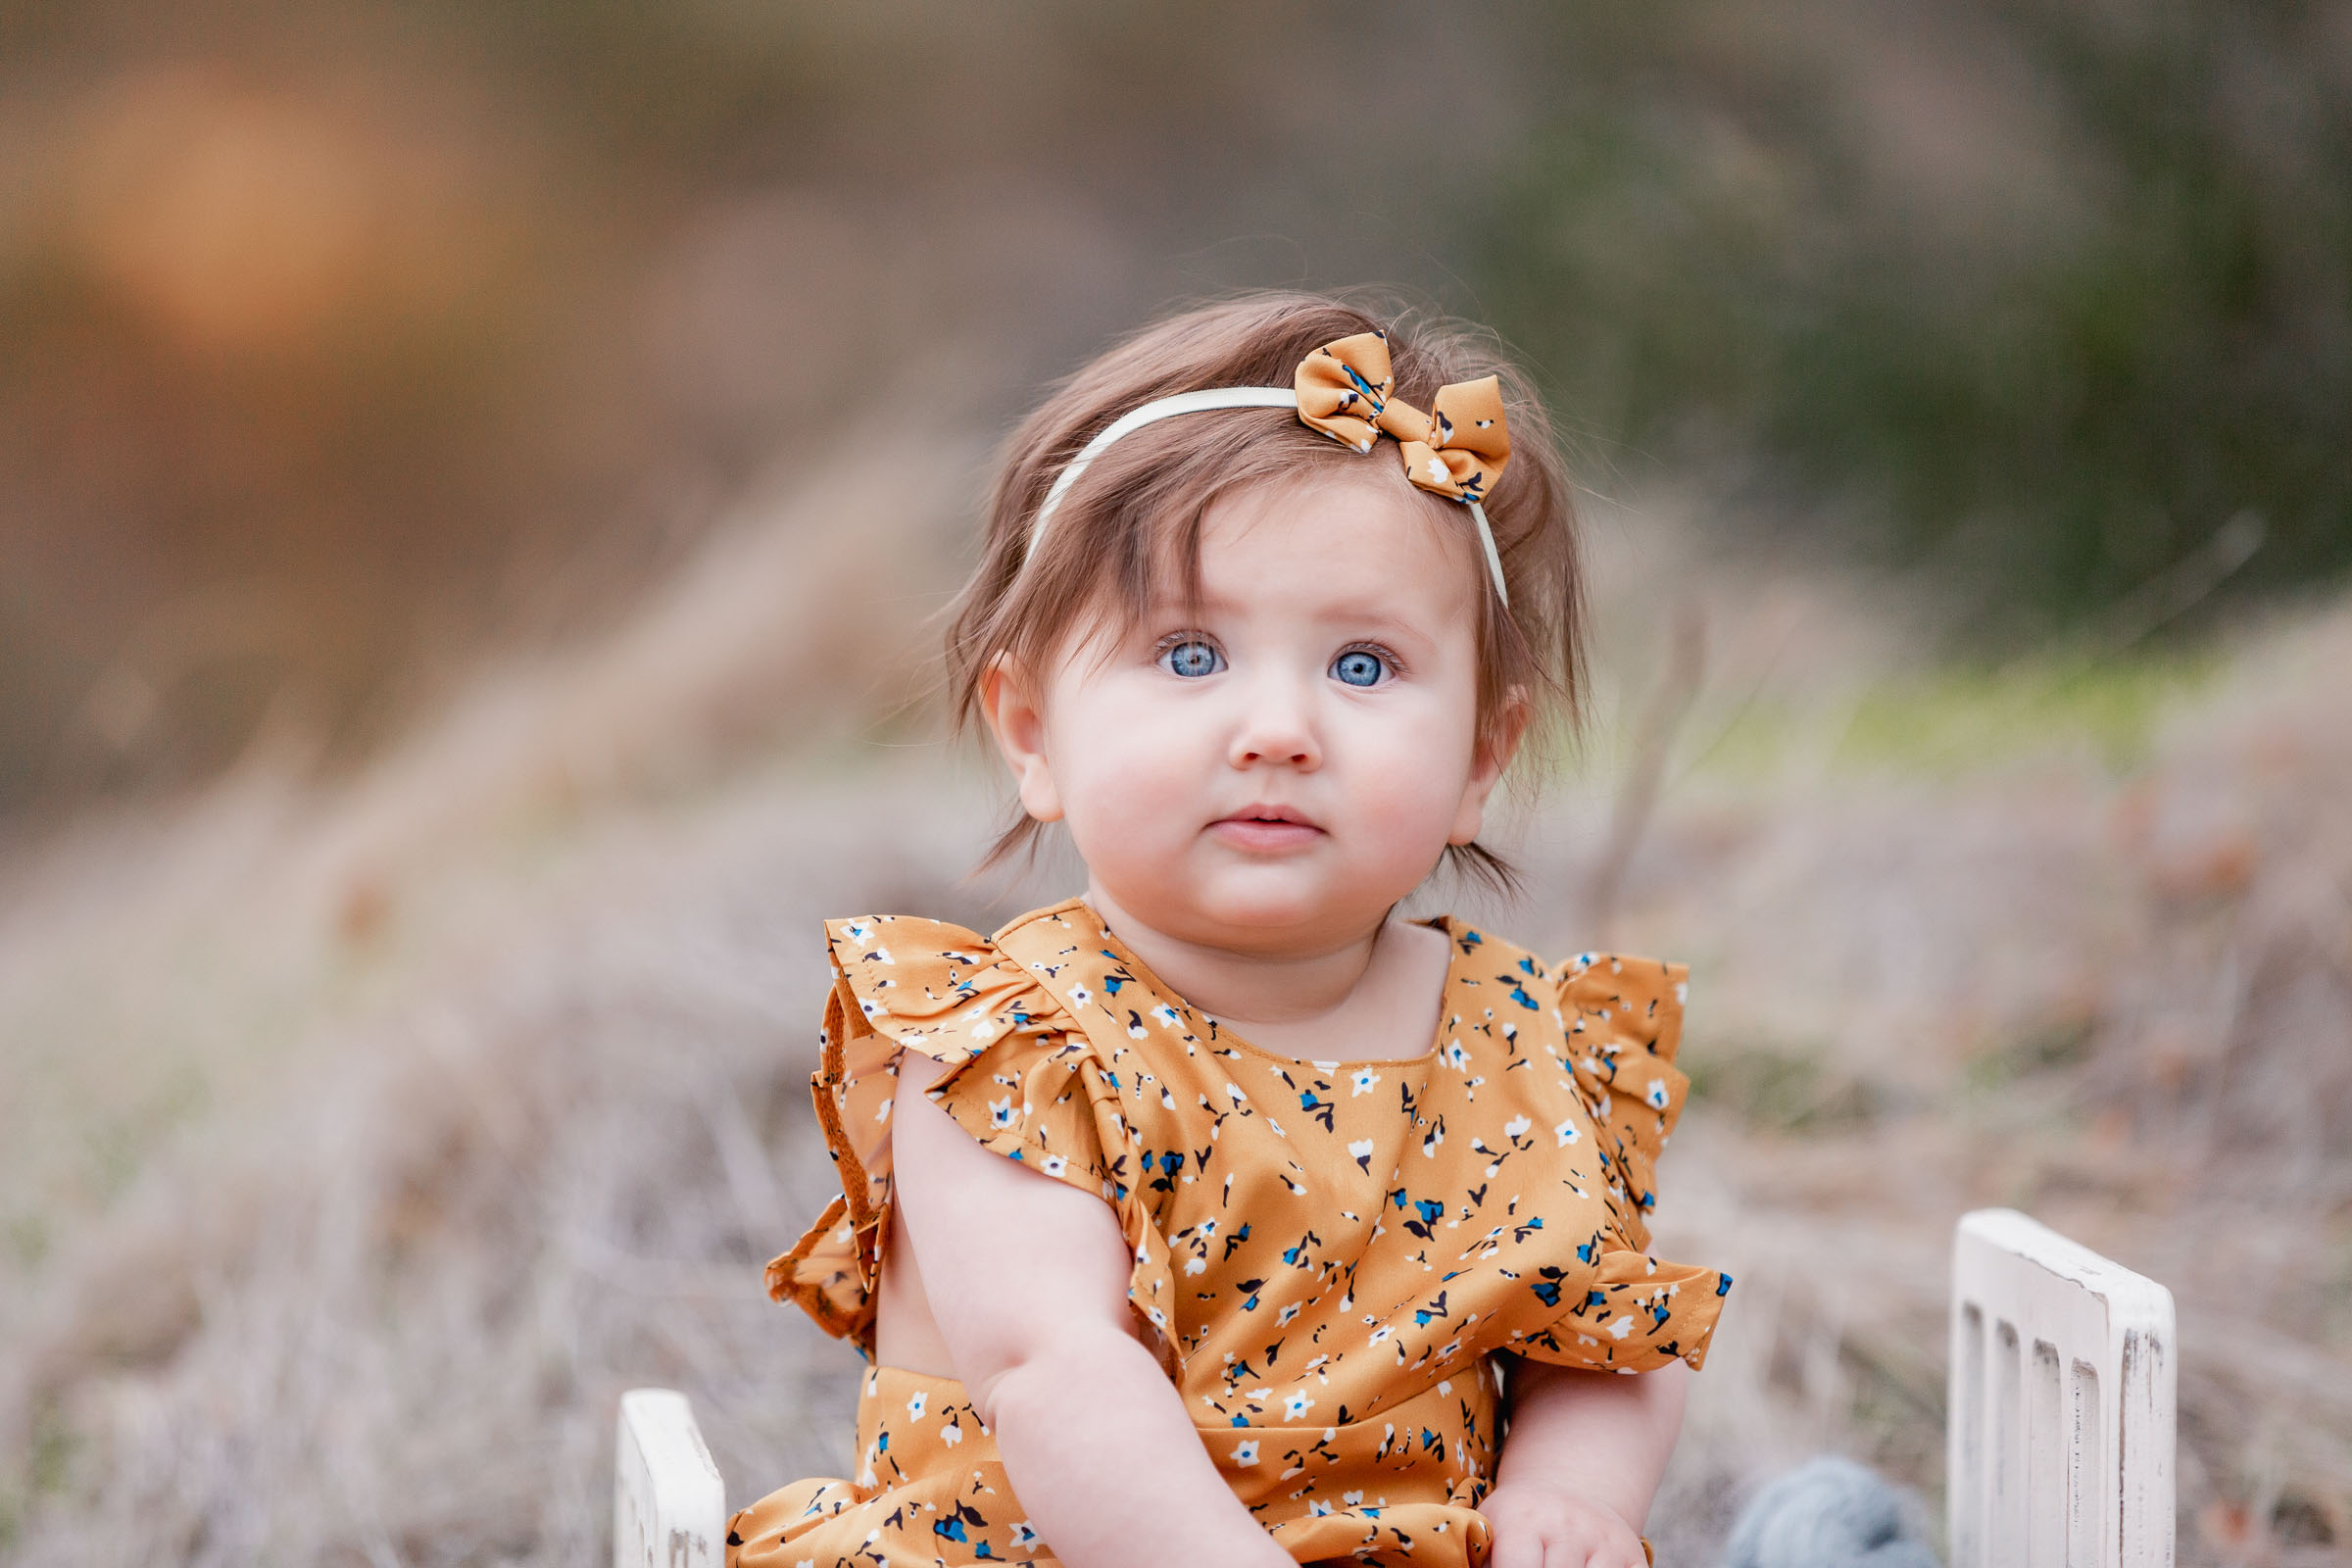 Close up of baby girl during outdoor photoshoot in San Diego dressed in a yellow outfit with small blue flowers